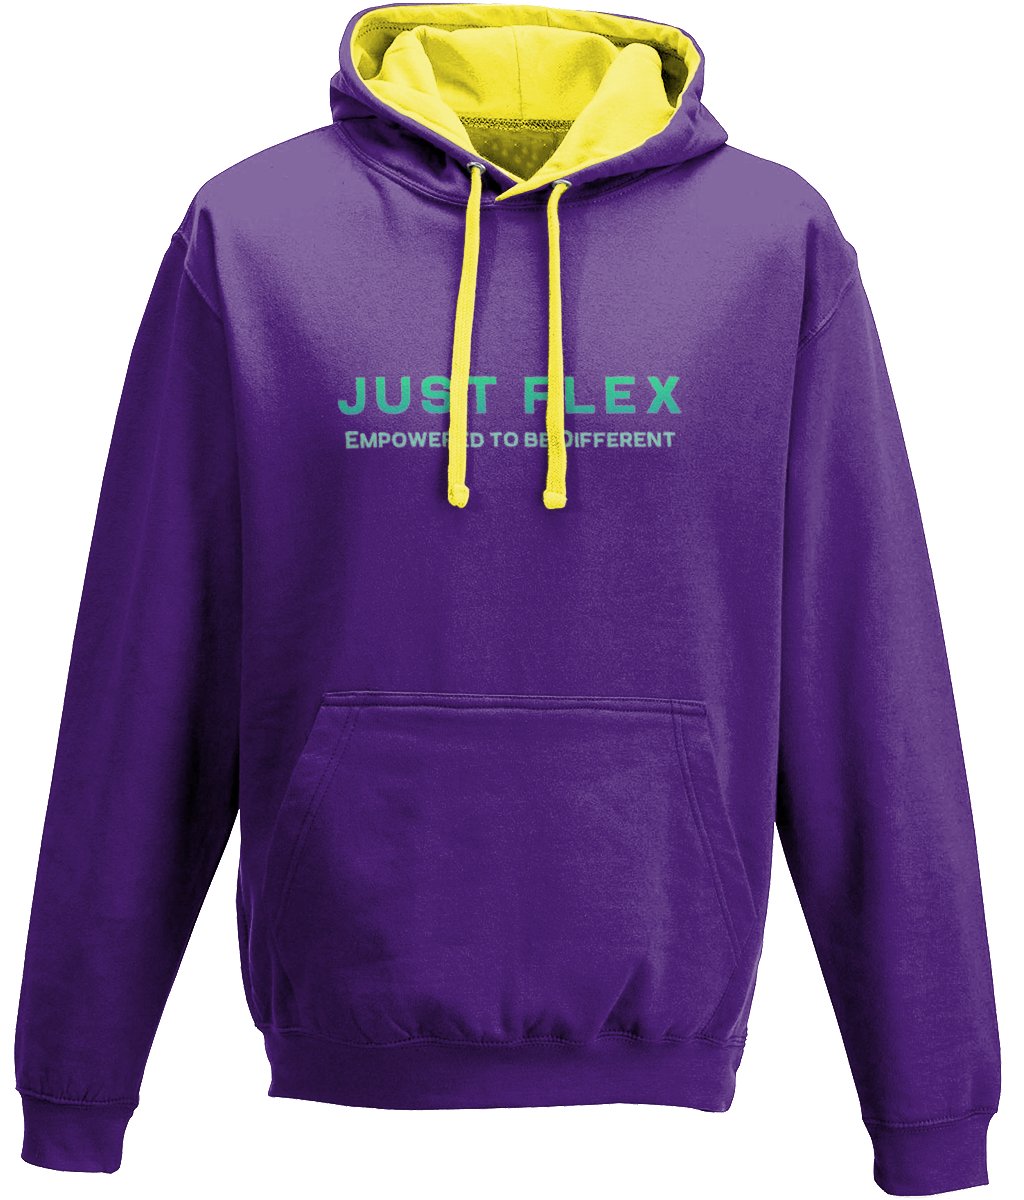 Just Flex - Empowered To Be Different Varsity Hoodie